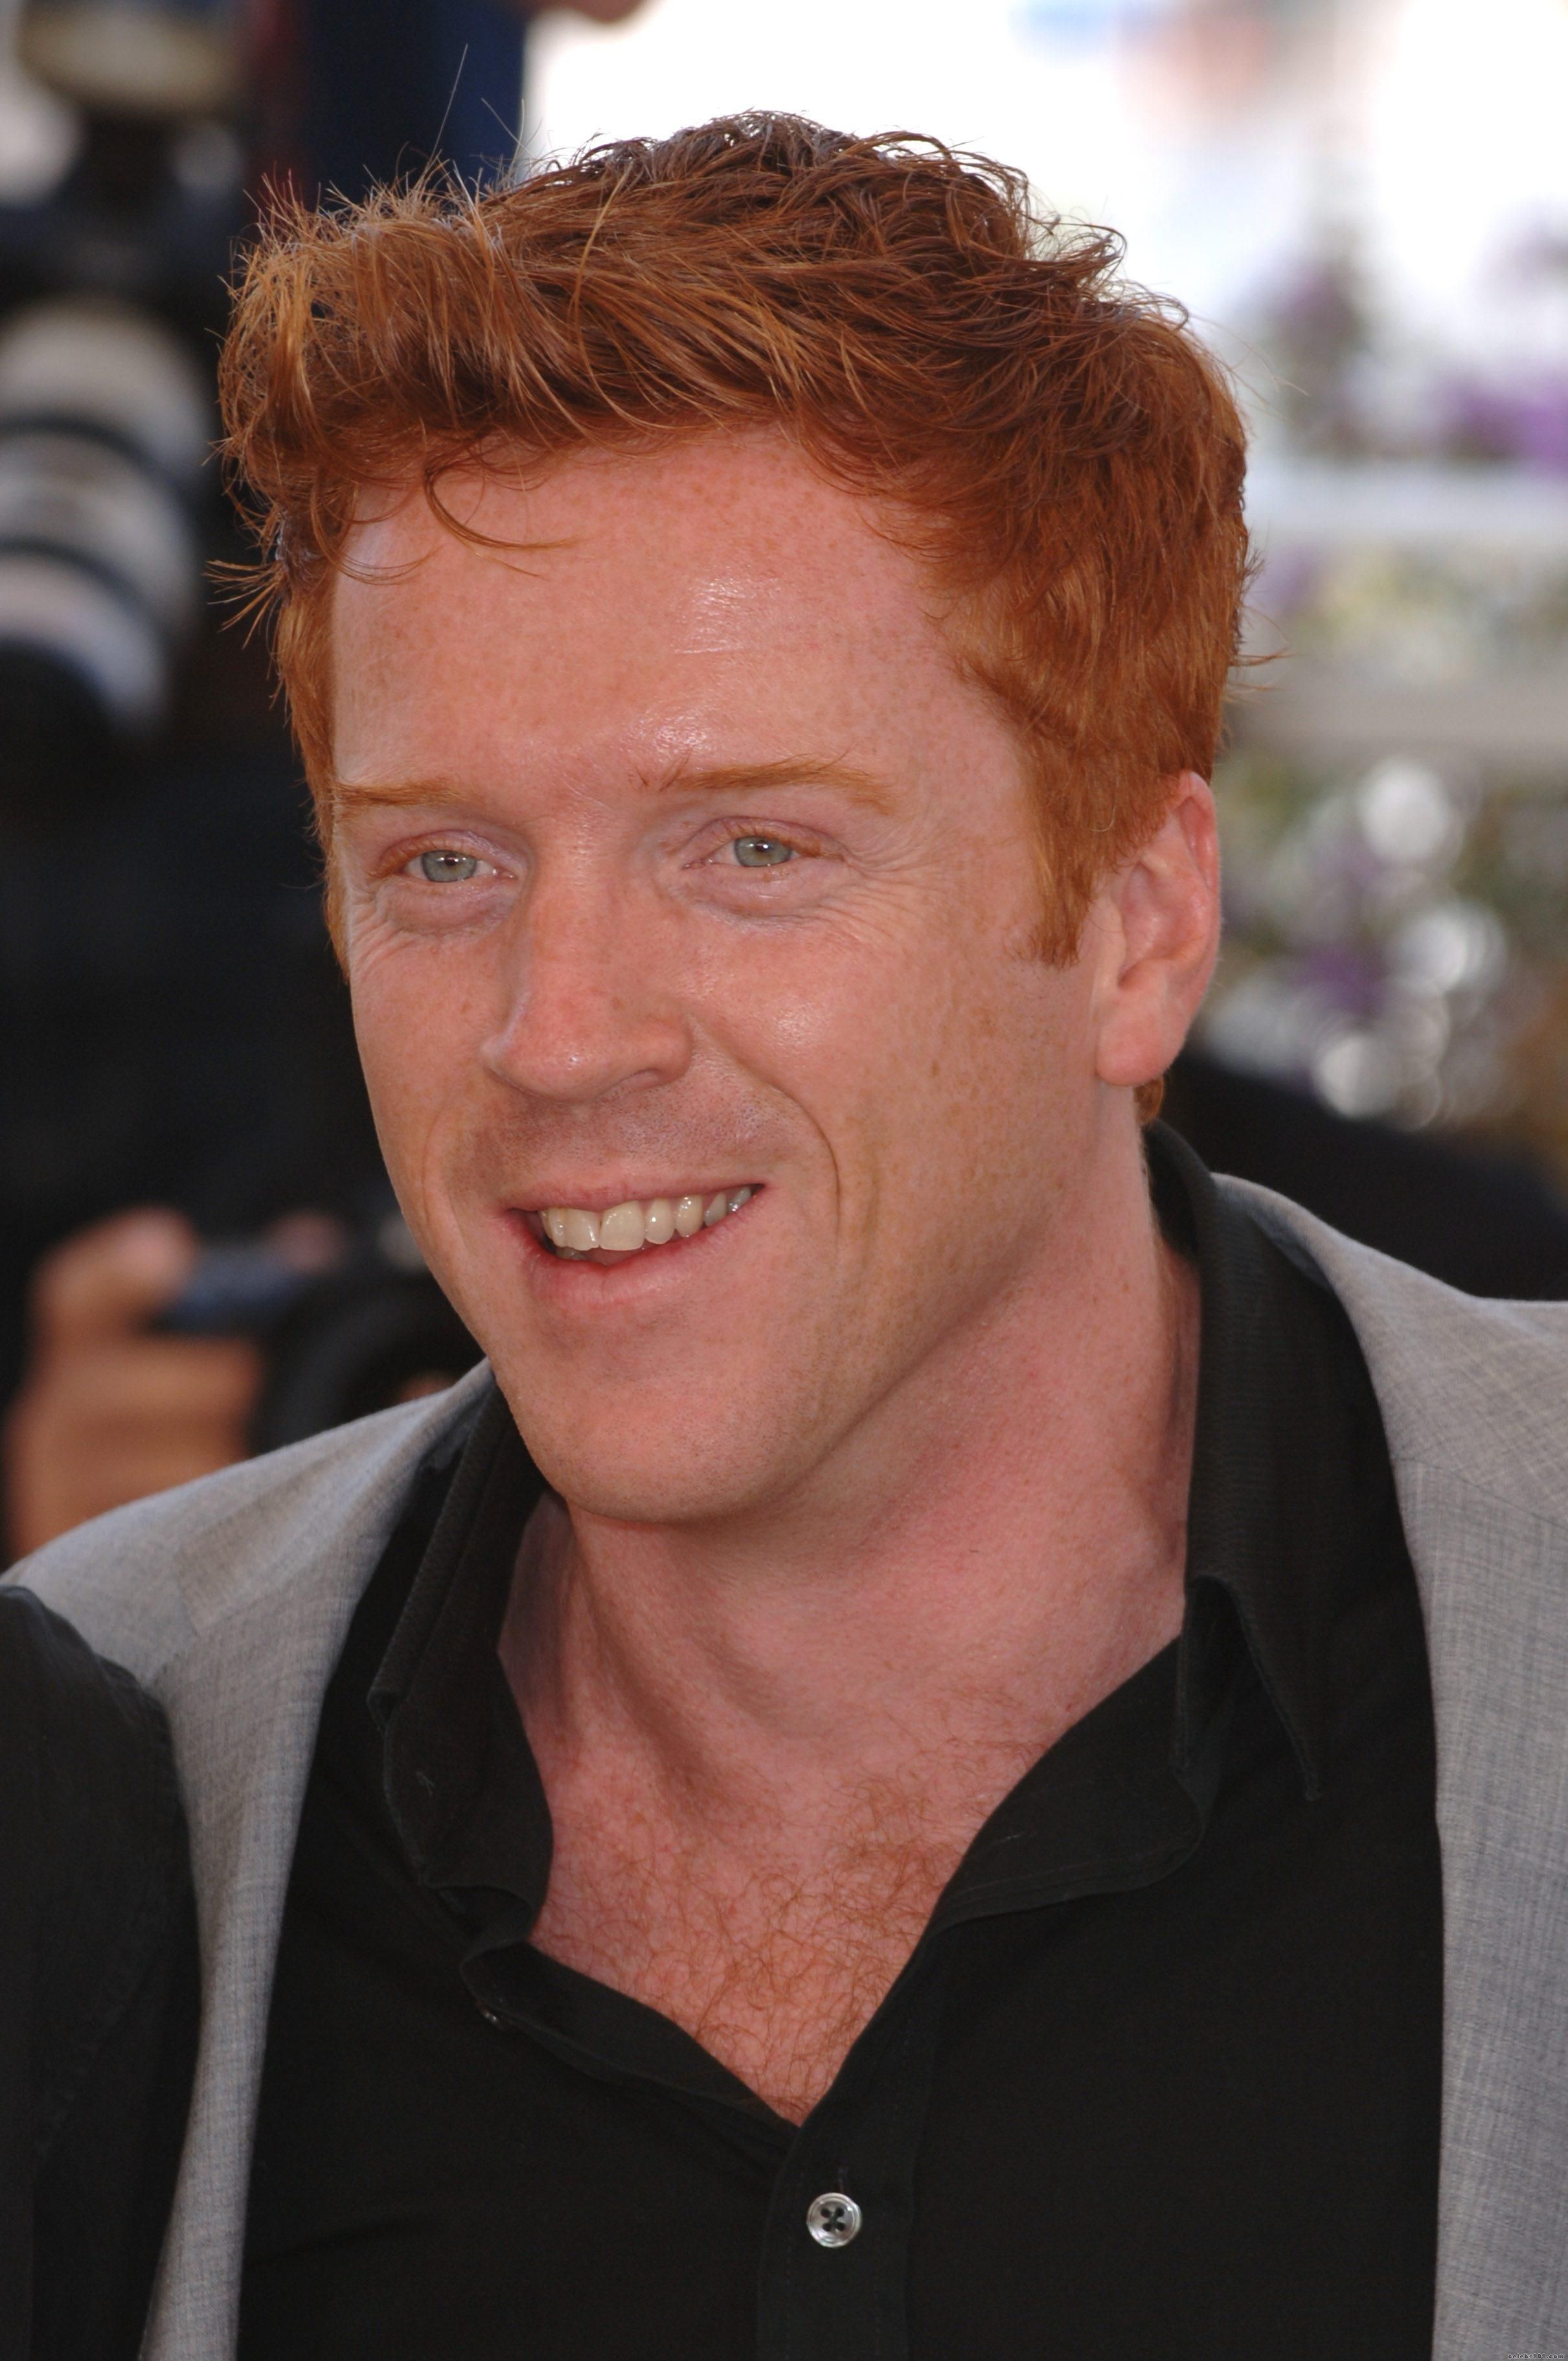 Damian Lewis. I love gingers! He's so pretty! | Damian lewis, Actor photo,  Ginger men